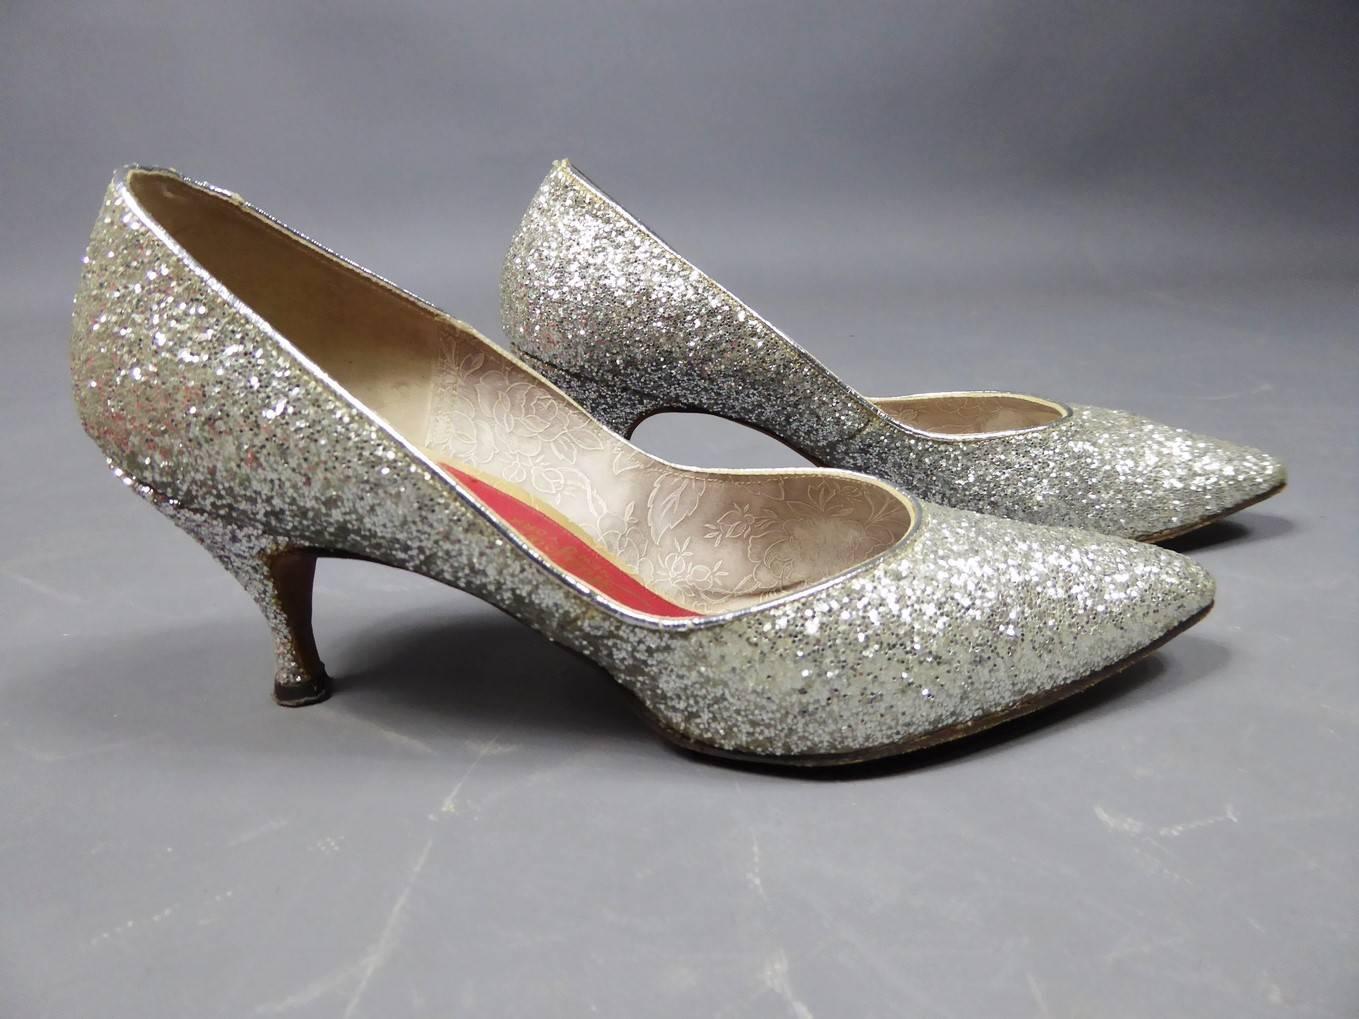 Pair of Schiaparelli silver glitter shoes in leather dating from the 1950s. Heel reel and pointed toe. Interior decorated with flowers and soles signed with a red label with Schiaparelli written in gold. Shoe box in shocking pink, emblematic